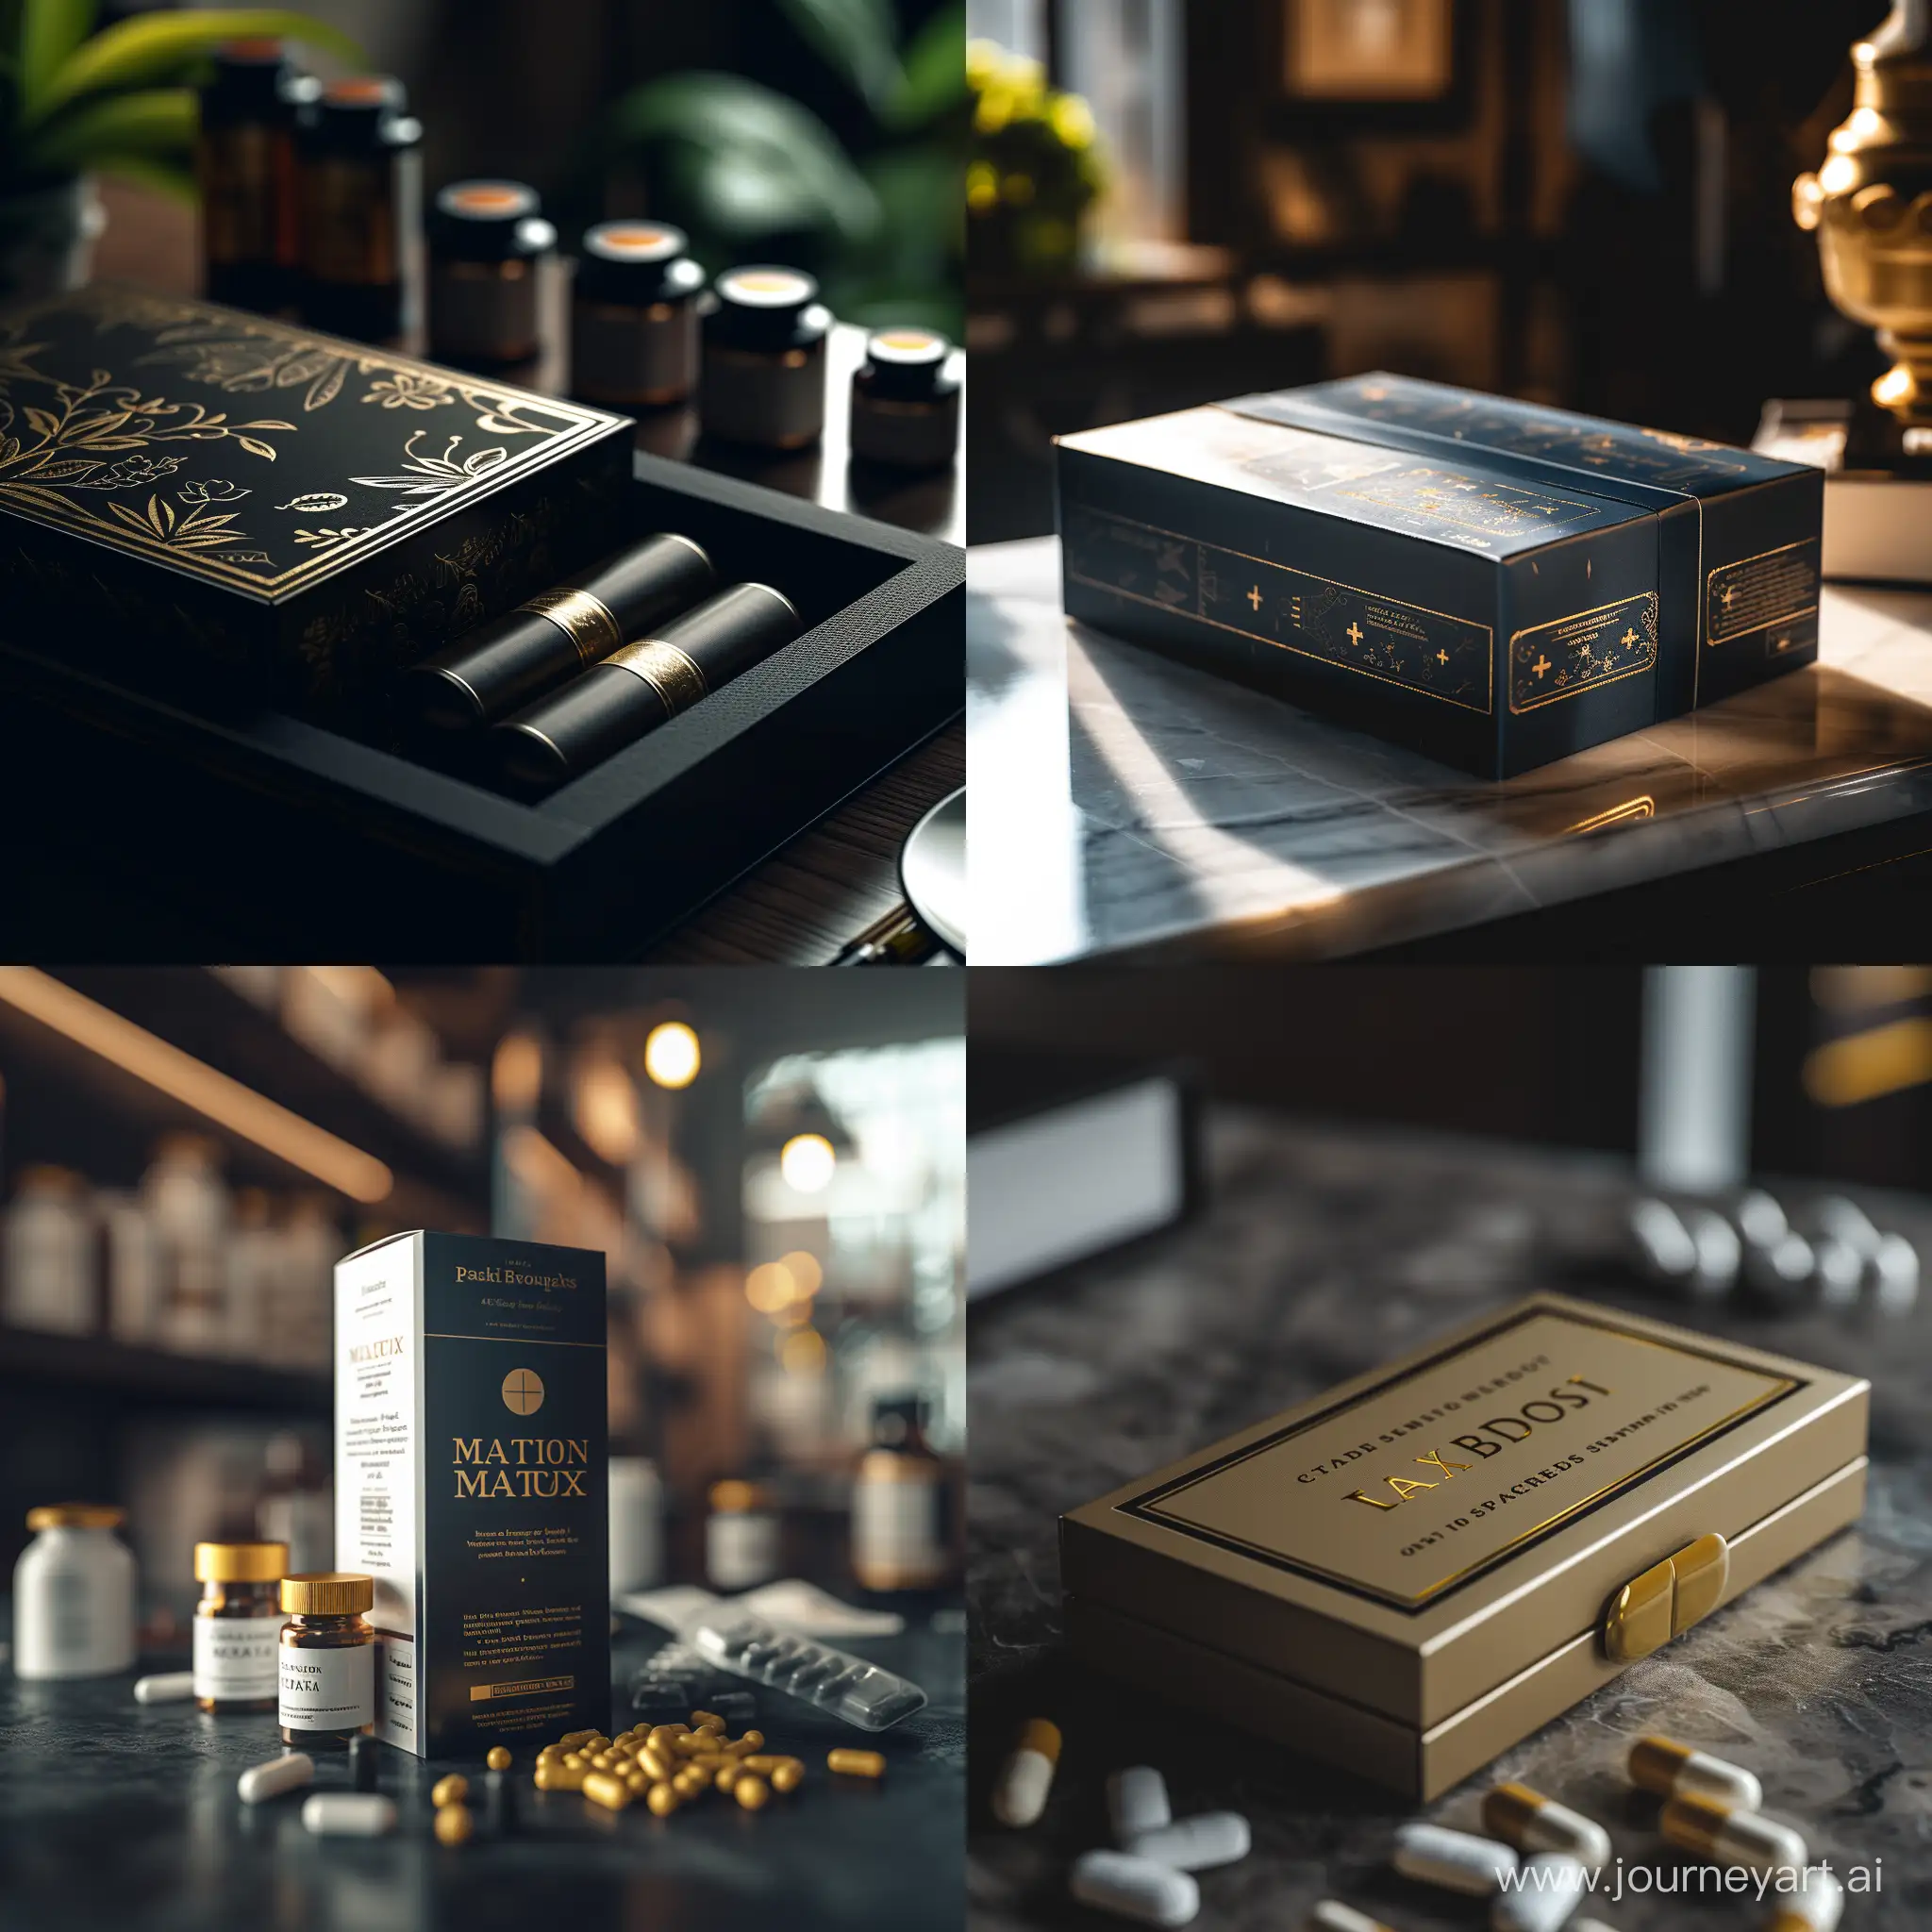 a big luxury box photoshoot which contains pharmesy information, this package is suitable for medicine and used for packaging medicine,  in pharmesy location, focus on packaging, whit cinamatic light, detailed, 4k,